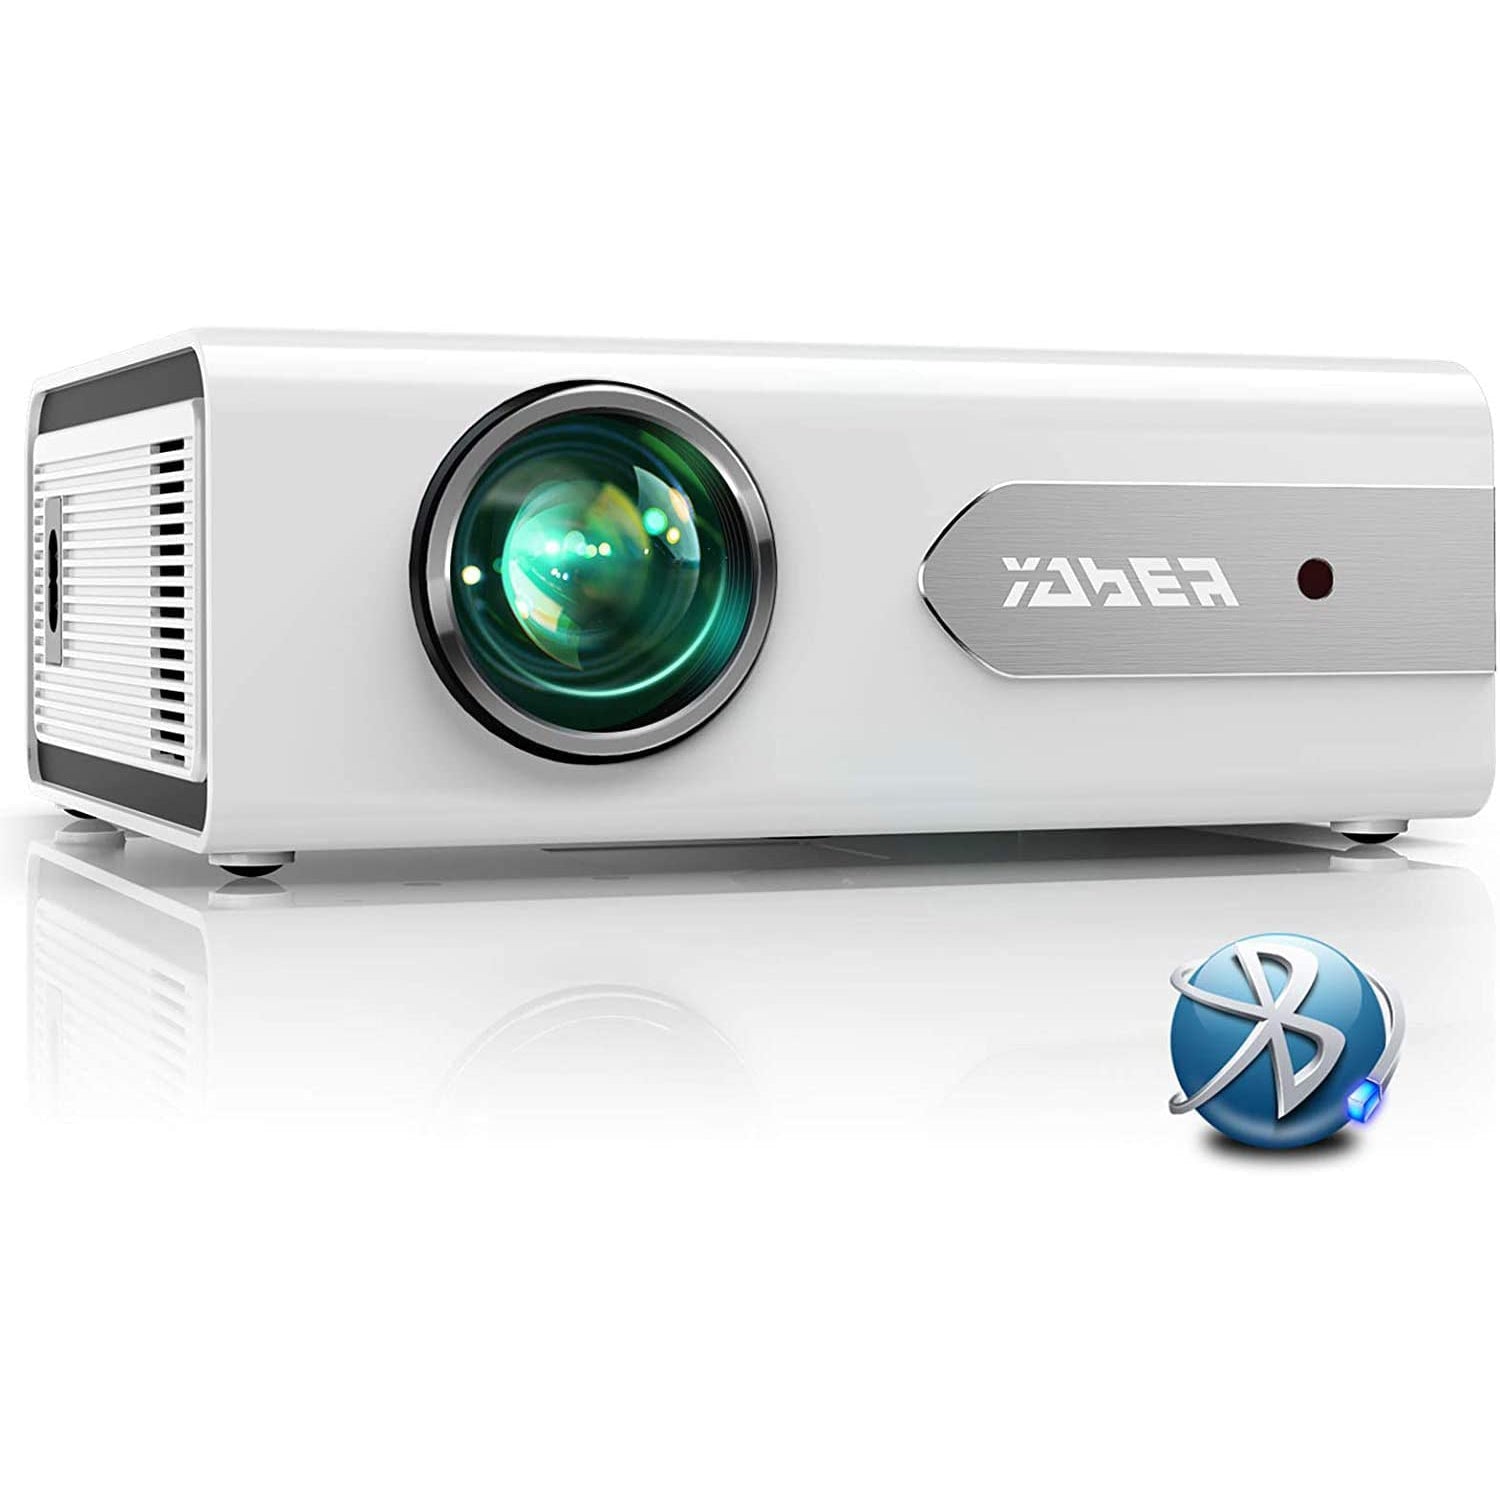 Yaber Mini Bluetooth Projector 6000 Lumens Portable Video Projector Full HD 1080P Home Theater